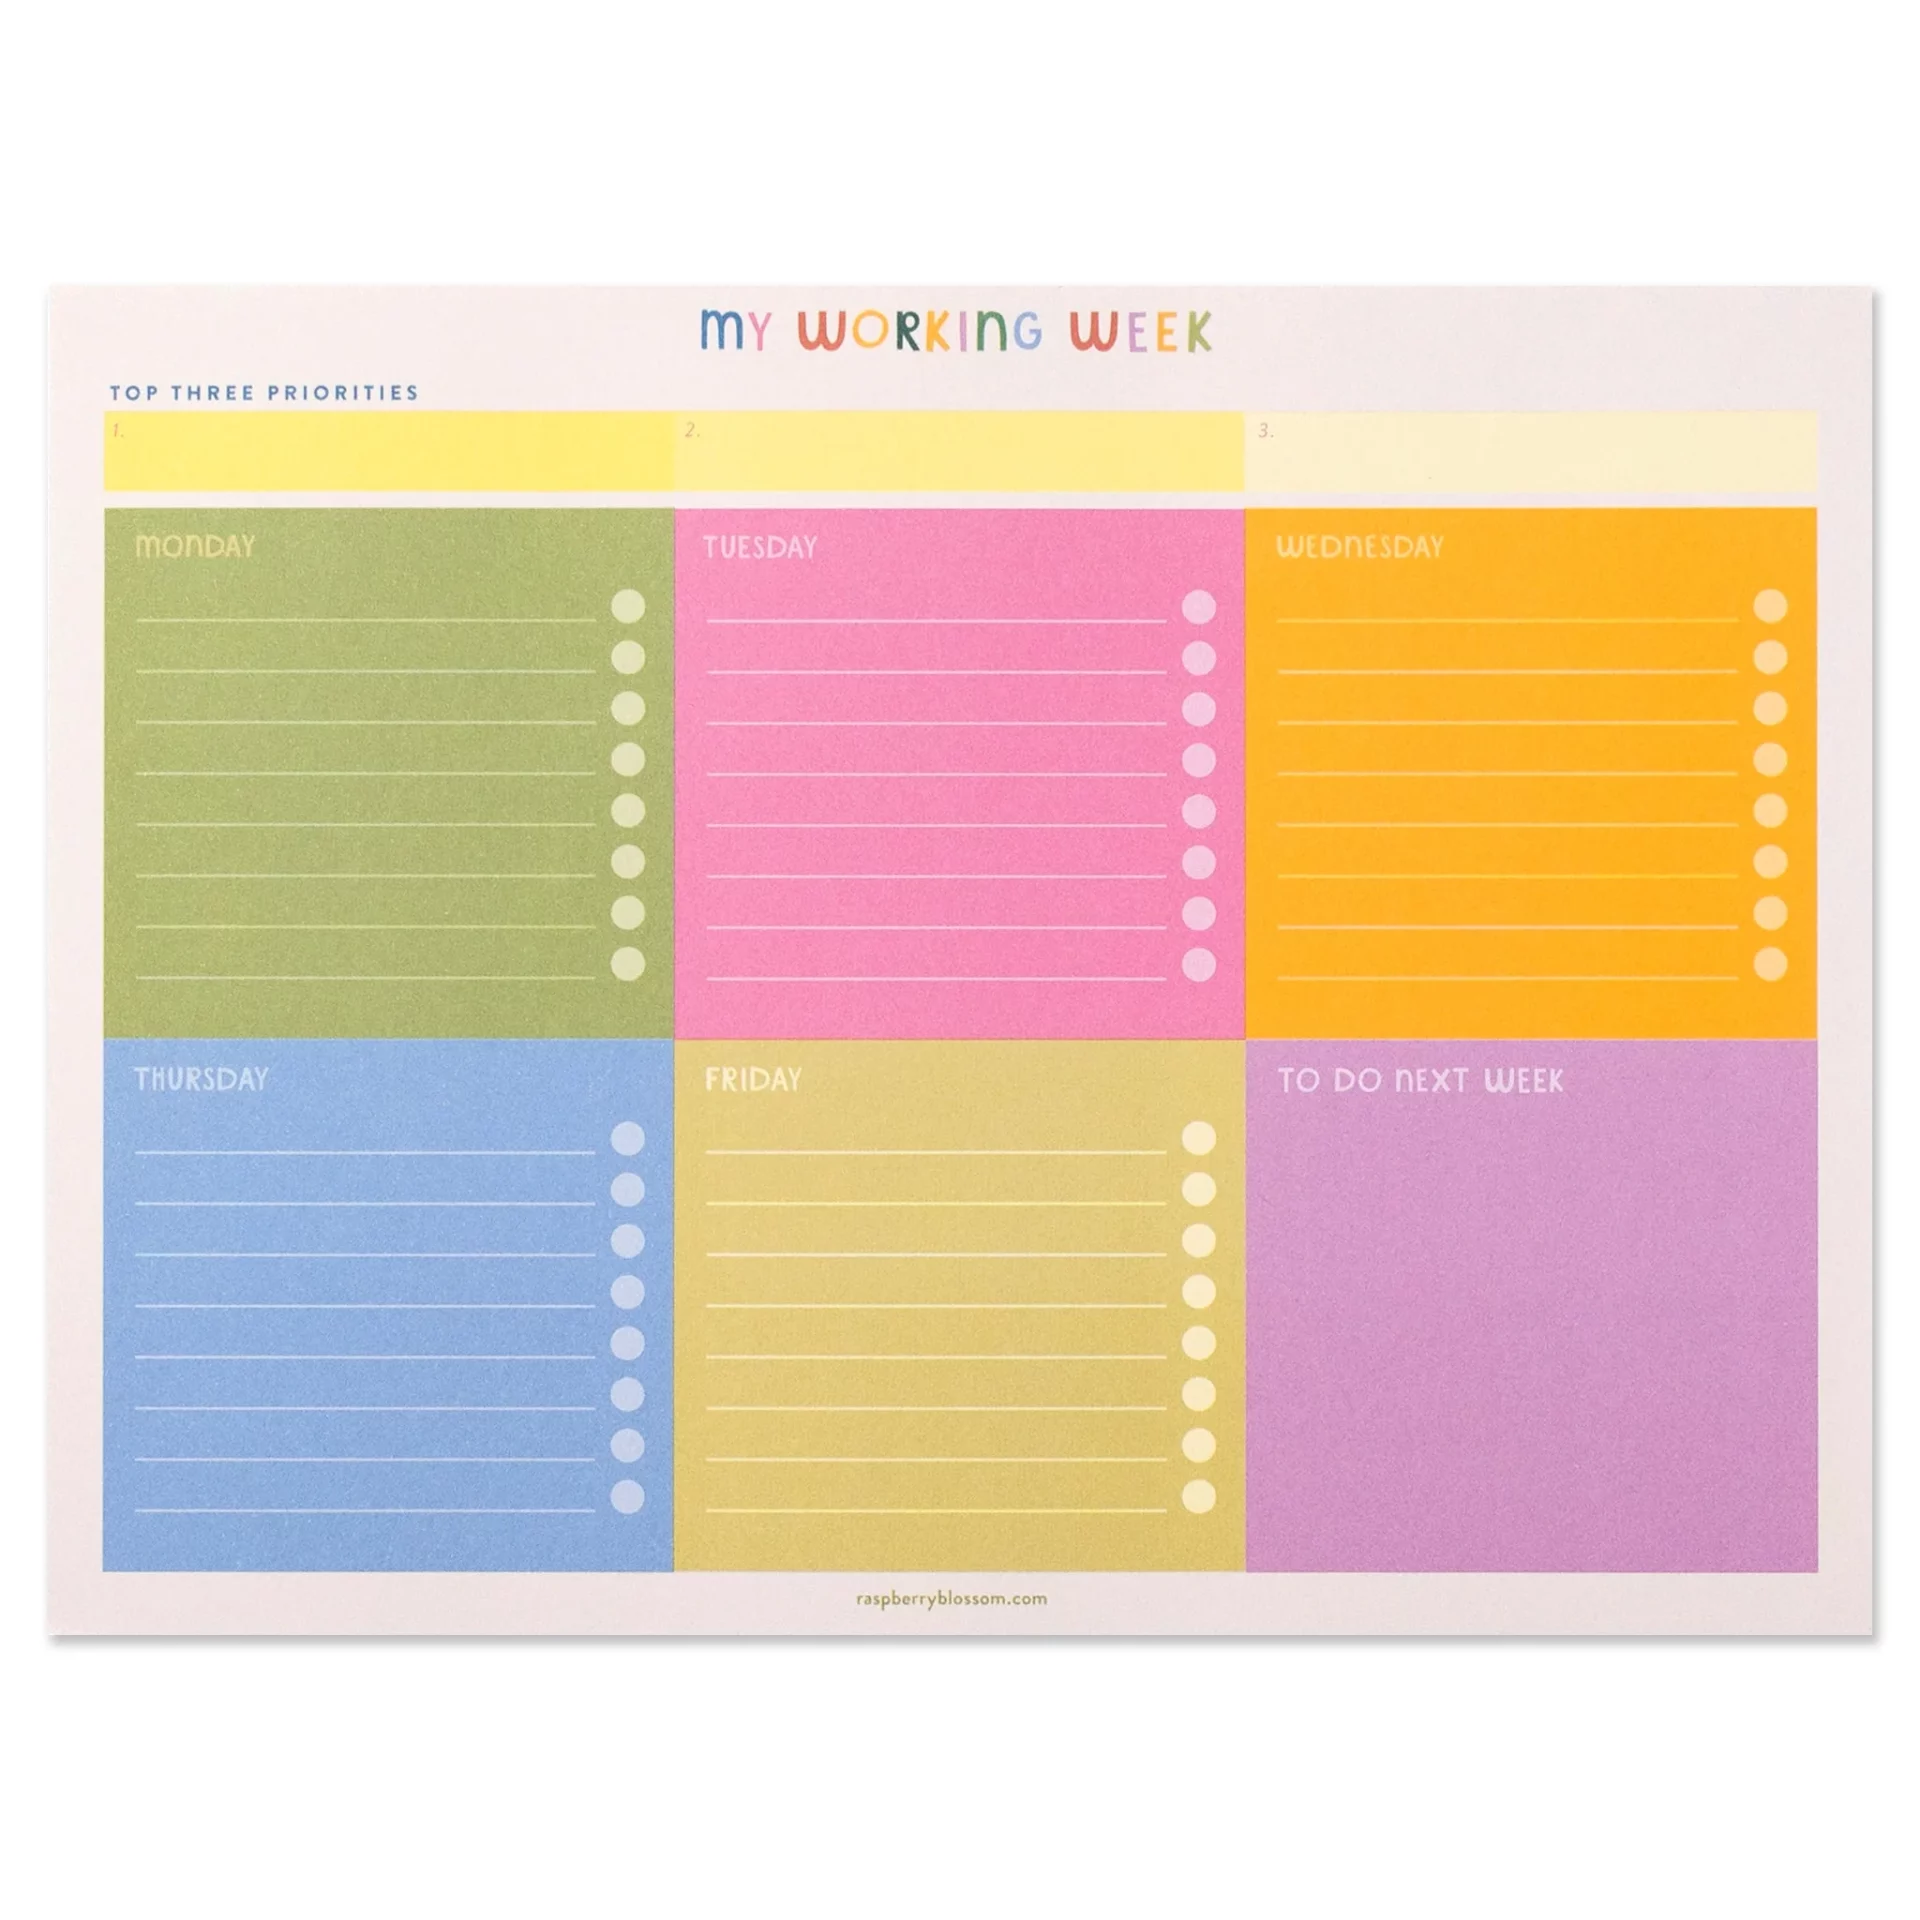 working week planner pad by raspberry blossom